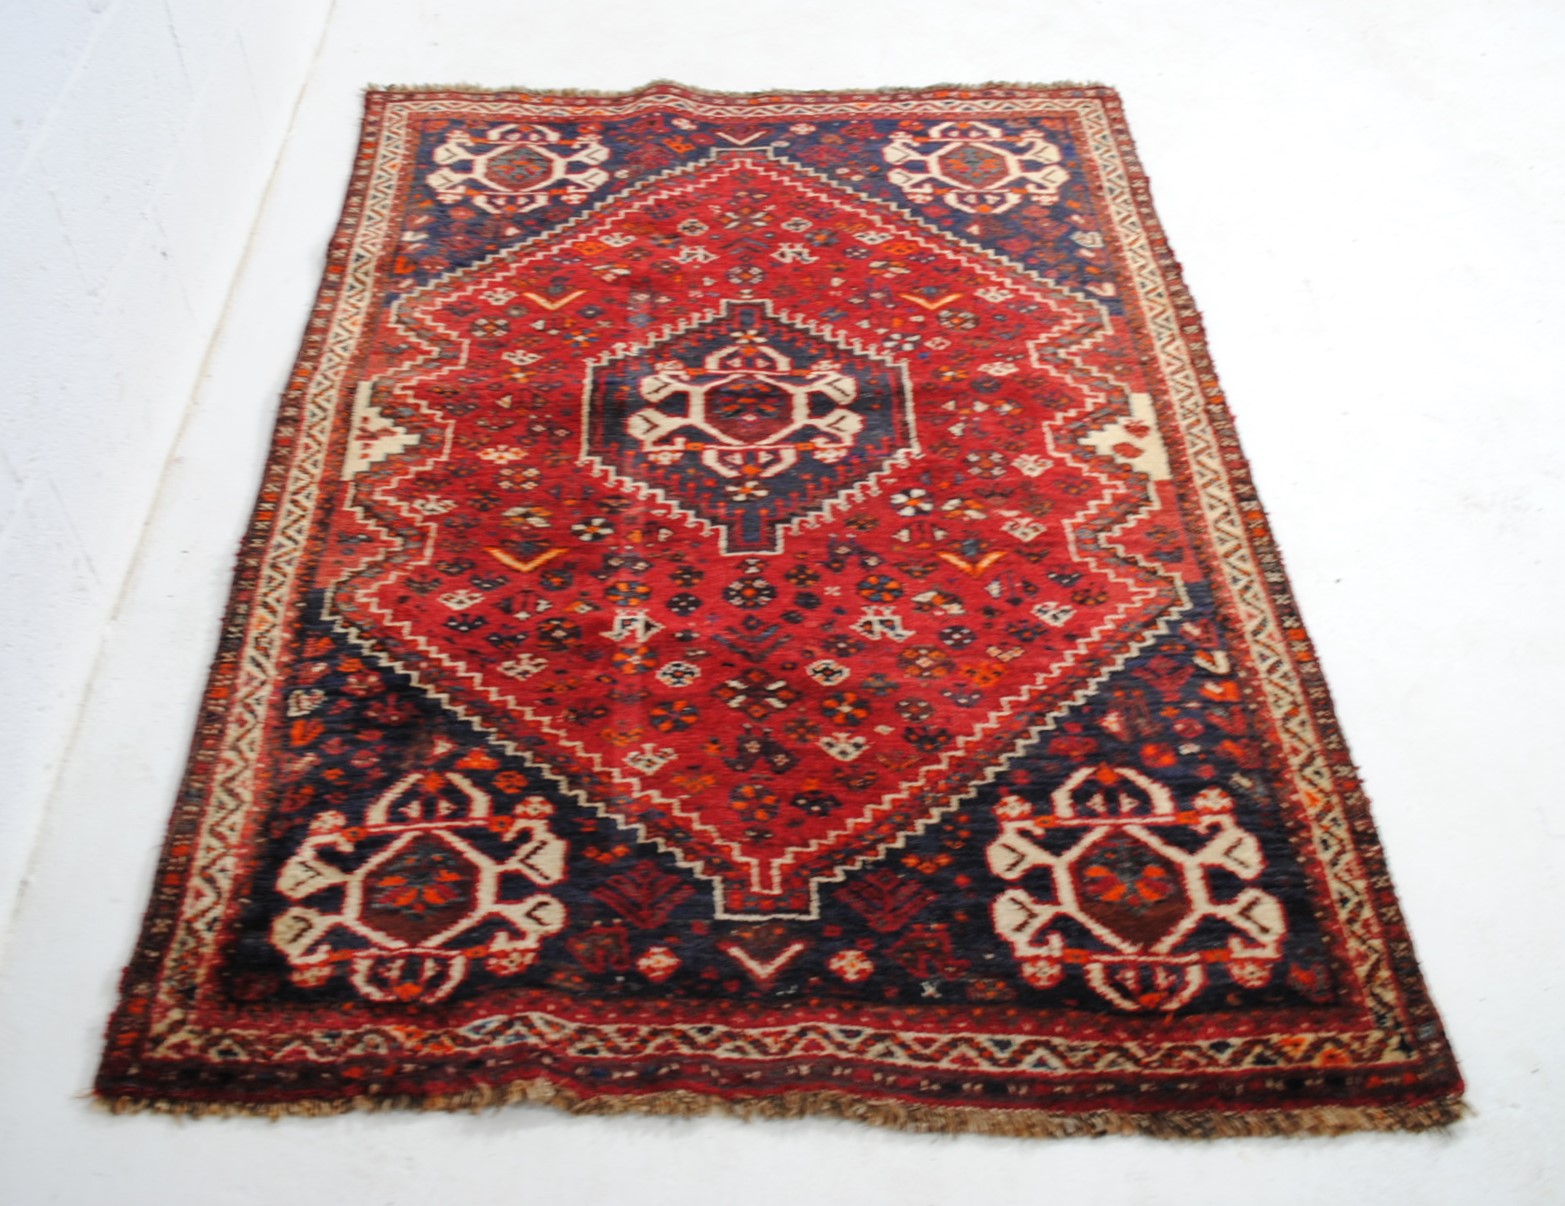 An Eastern red ground rug, with traditional designs - 173cm x 123cm - Image 4 of 8